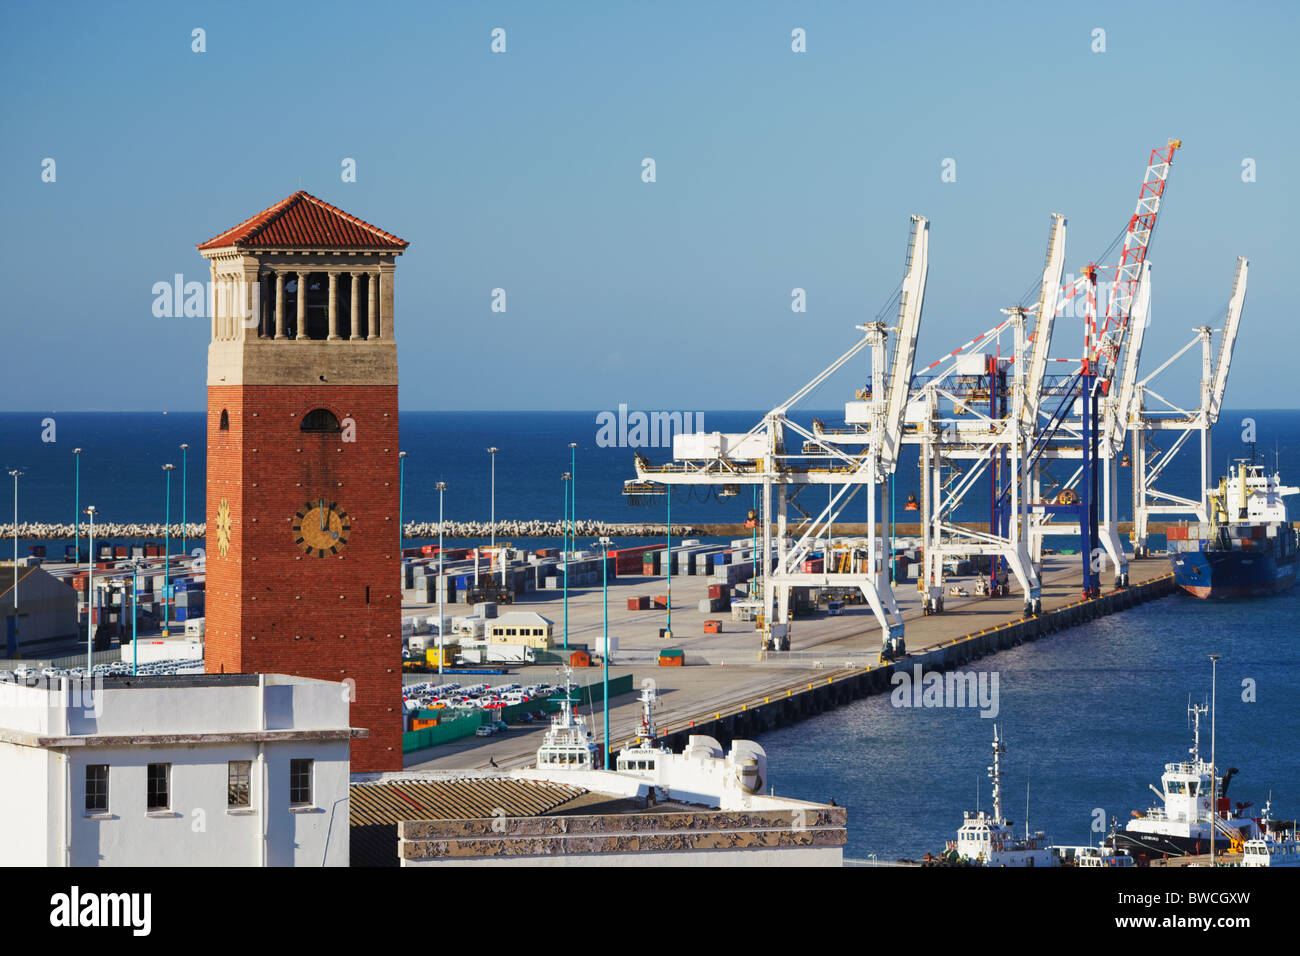 View of Campanile with dockyard in background, Port Elizabeth, Eastern Cape, South Africa Stock Photo